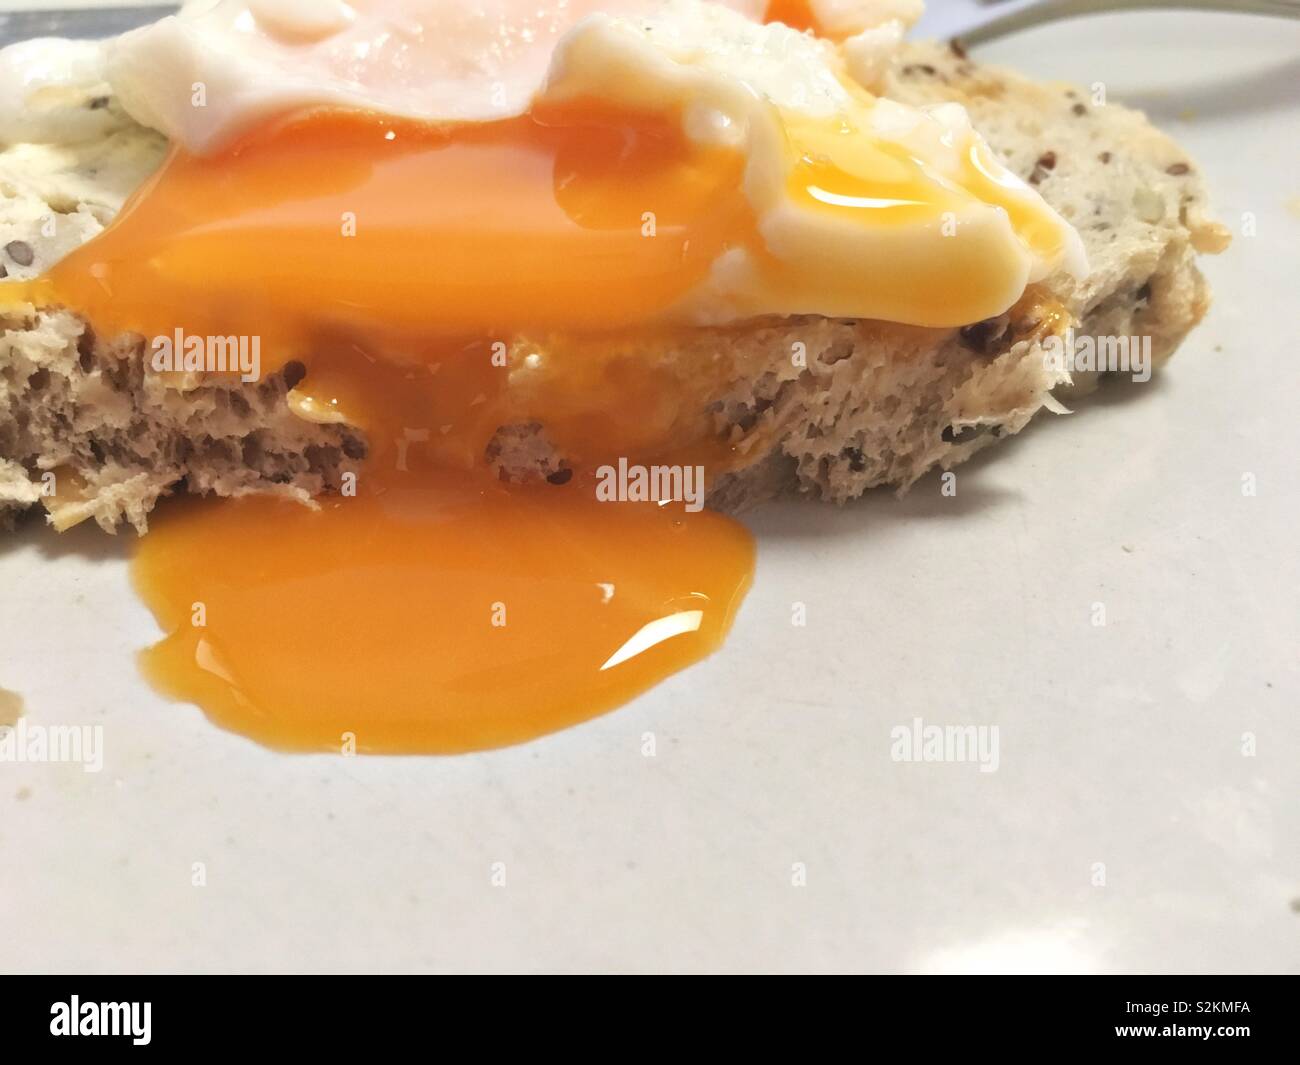 Poached free range egg on a superfood gluten free grain bread.  Delicious protein snack. Stock Photo